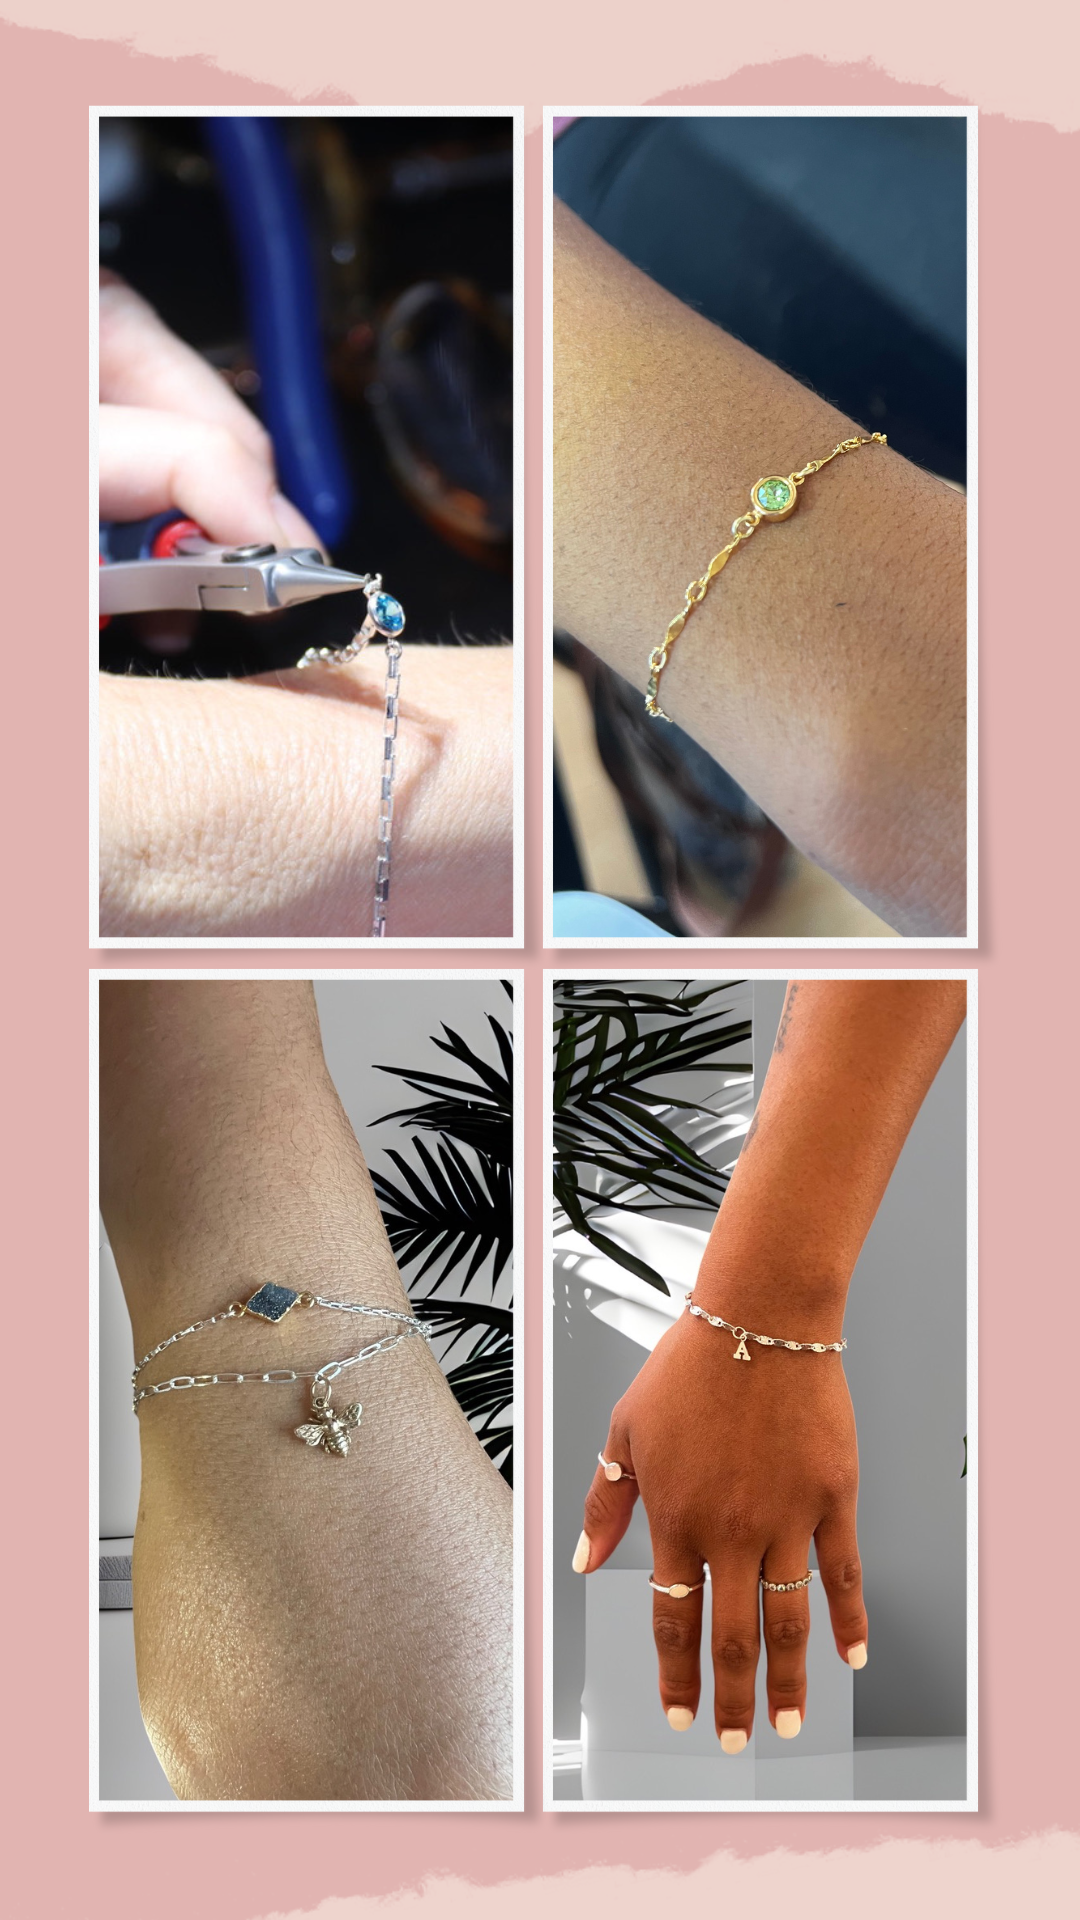 Bedrock Rose Infinity Jewelry, Permanent Jewelry, Custom Bracelet, Anklet, Private Party, Pop-Up Event